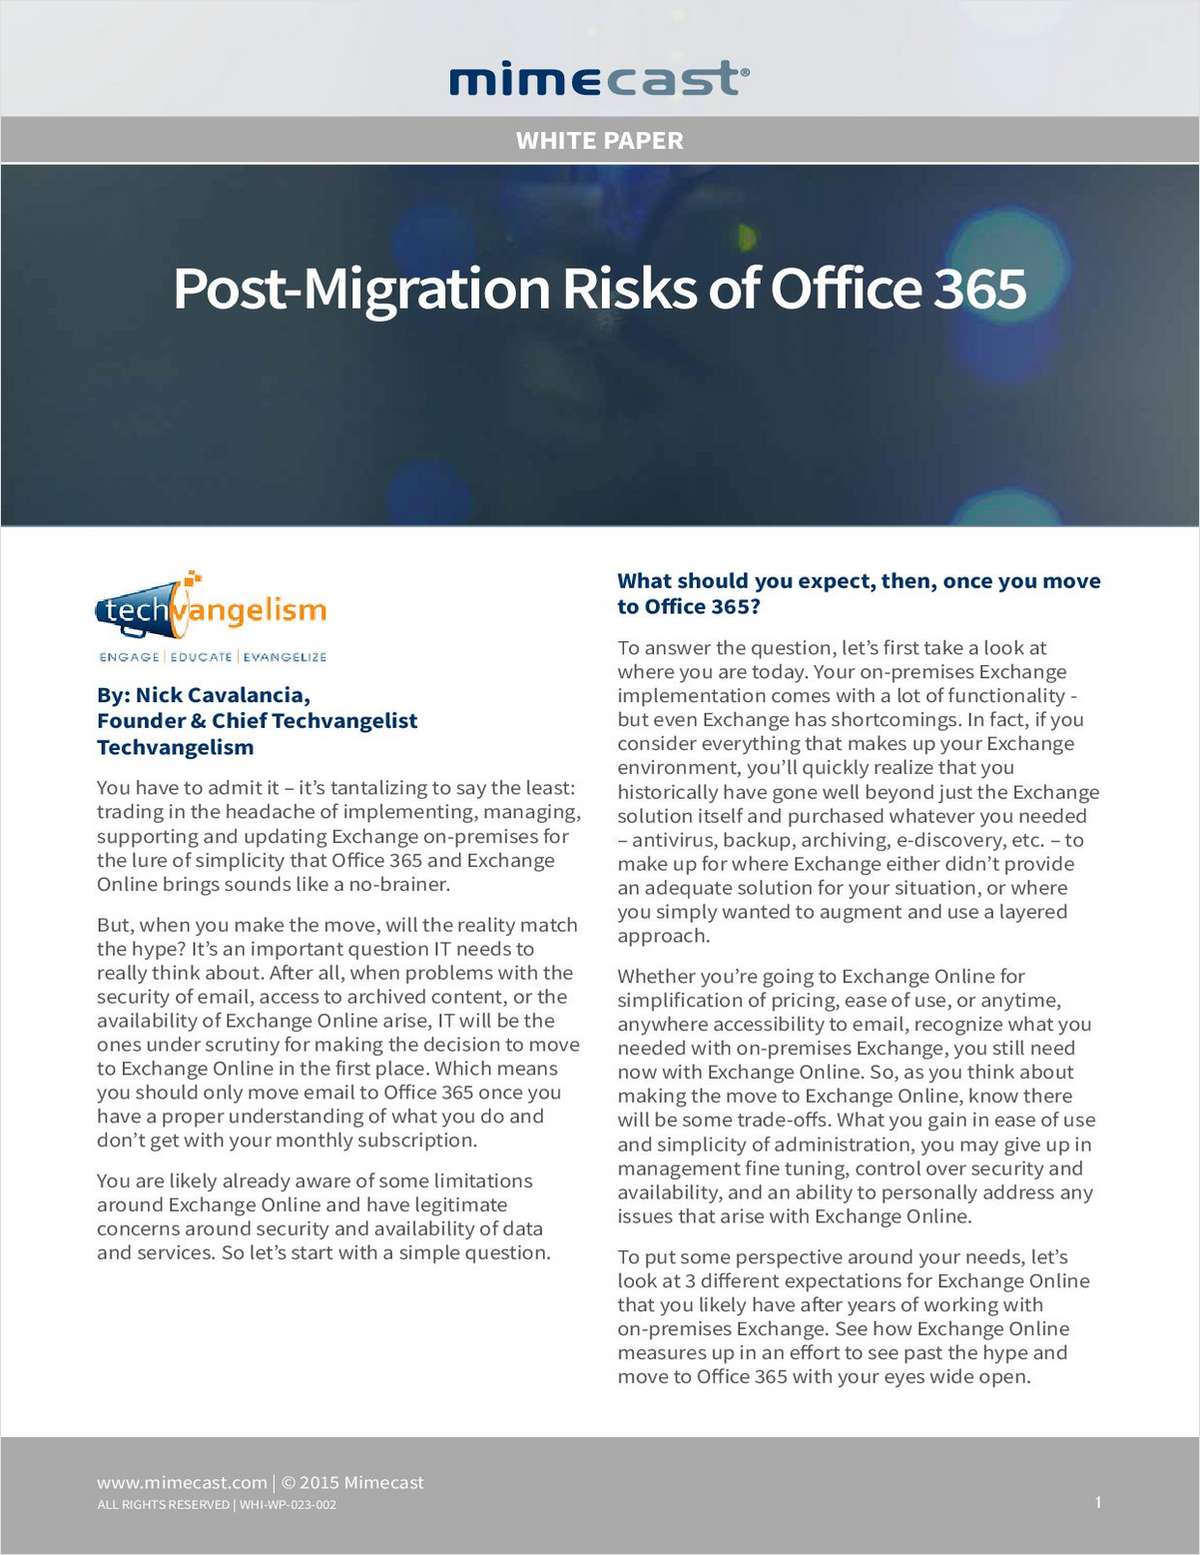 Post-Migration Risks of Office 365: Market-Driven Expectations And Actual Realities Of Moving To The Cloud